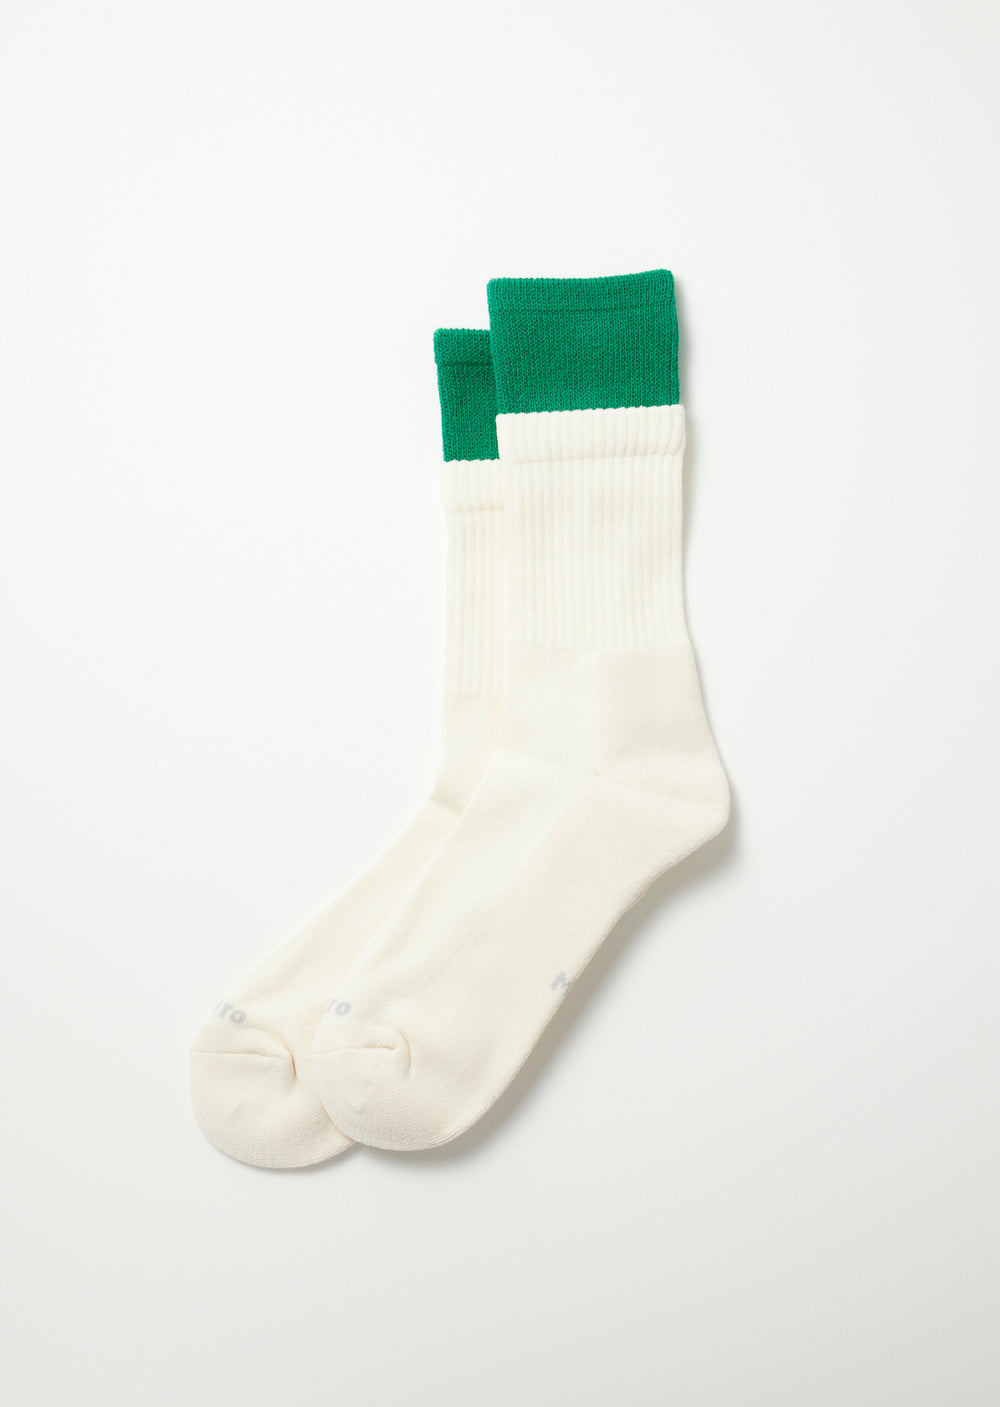 Double Layer Crew Socks - Green/Off White - R1494